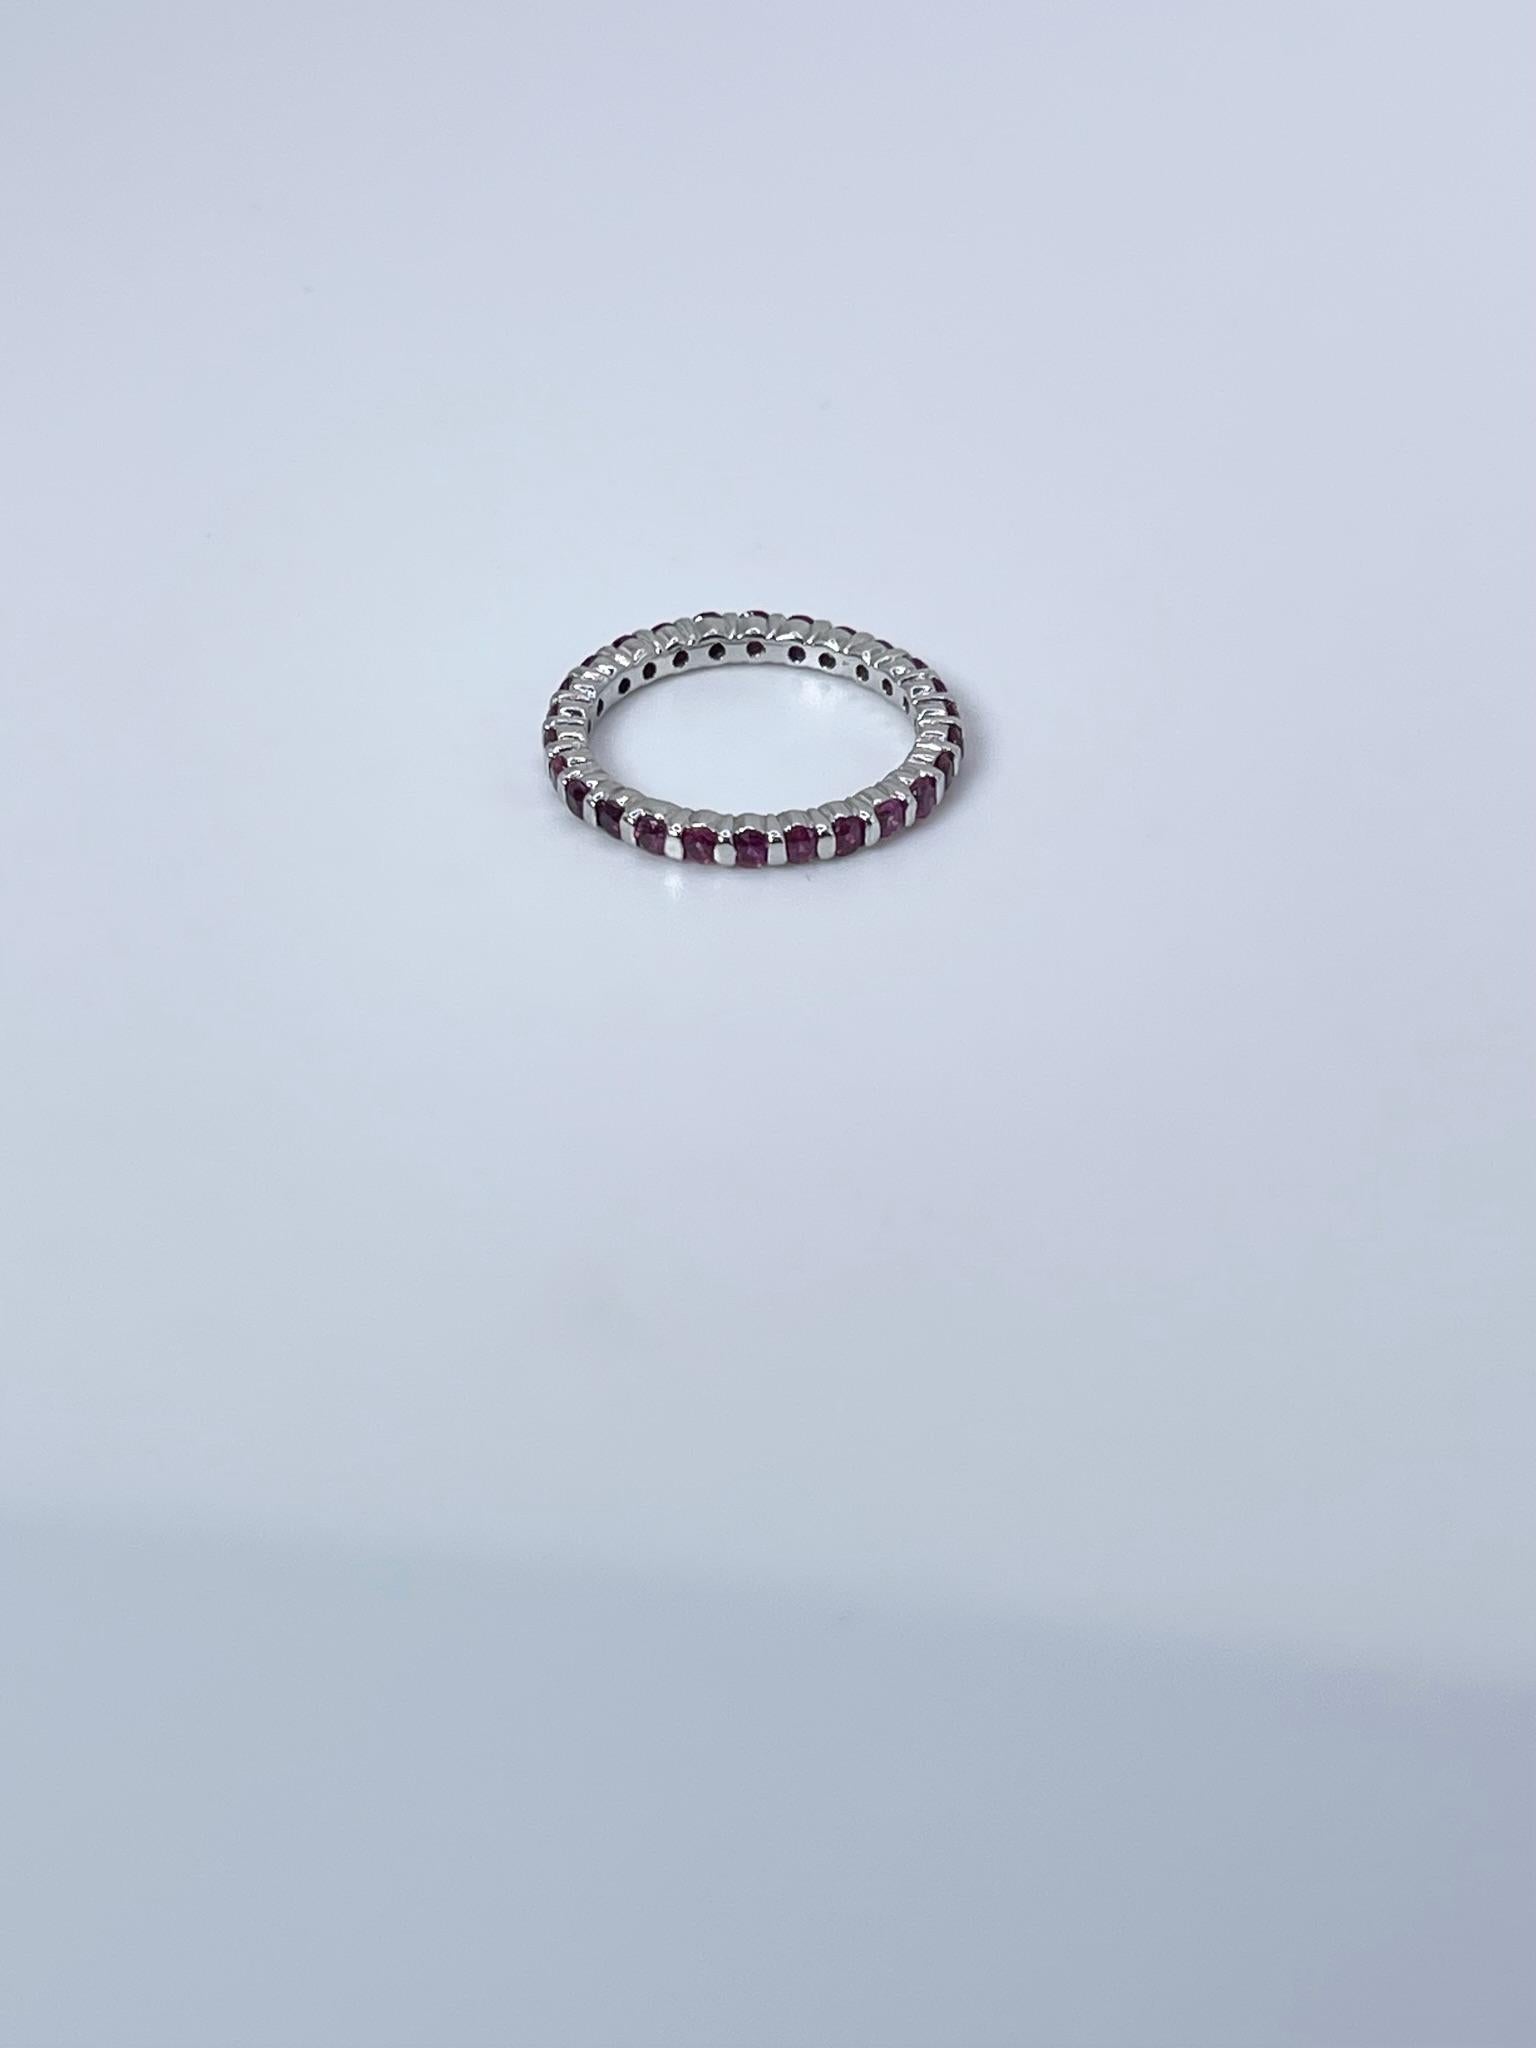 Stunning round eternity ring made with 14KT white gold and natural red rubies, untrated.
ITEM#: MFK 200-00044
GRAM WEIGHT: 2.36gr
METAL: 14KT

NATURAL DIAMOND(S)
Cut: Round 
Color: Pinkish Red
Clarity: Slightly Included
Carat: 1.14ct
Size: 6.5 (